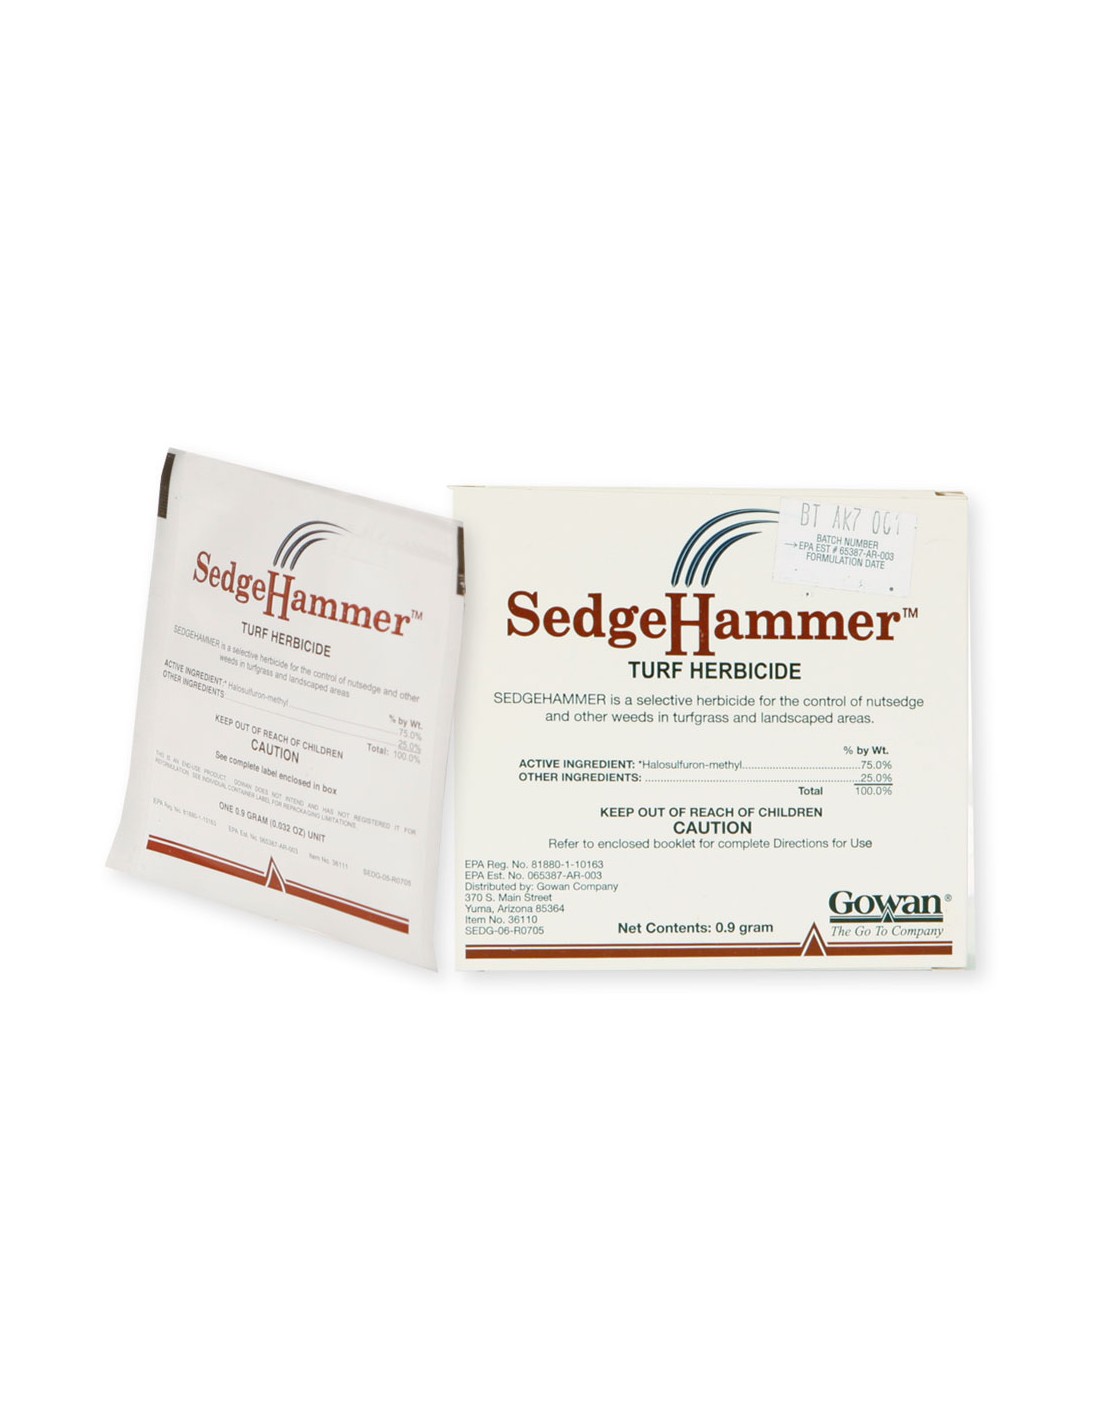 SedgeHammer Turf Herbicide Questions & Answers